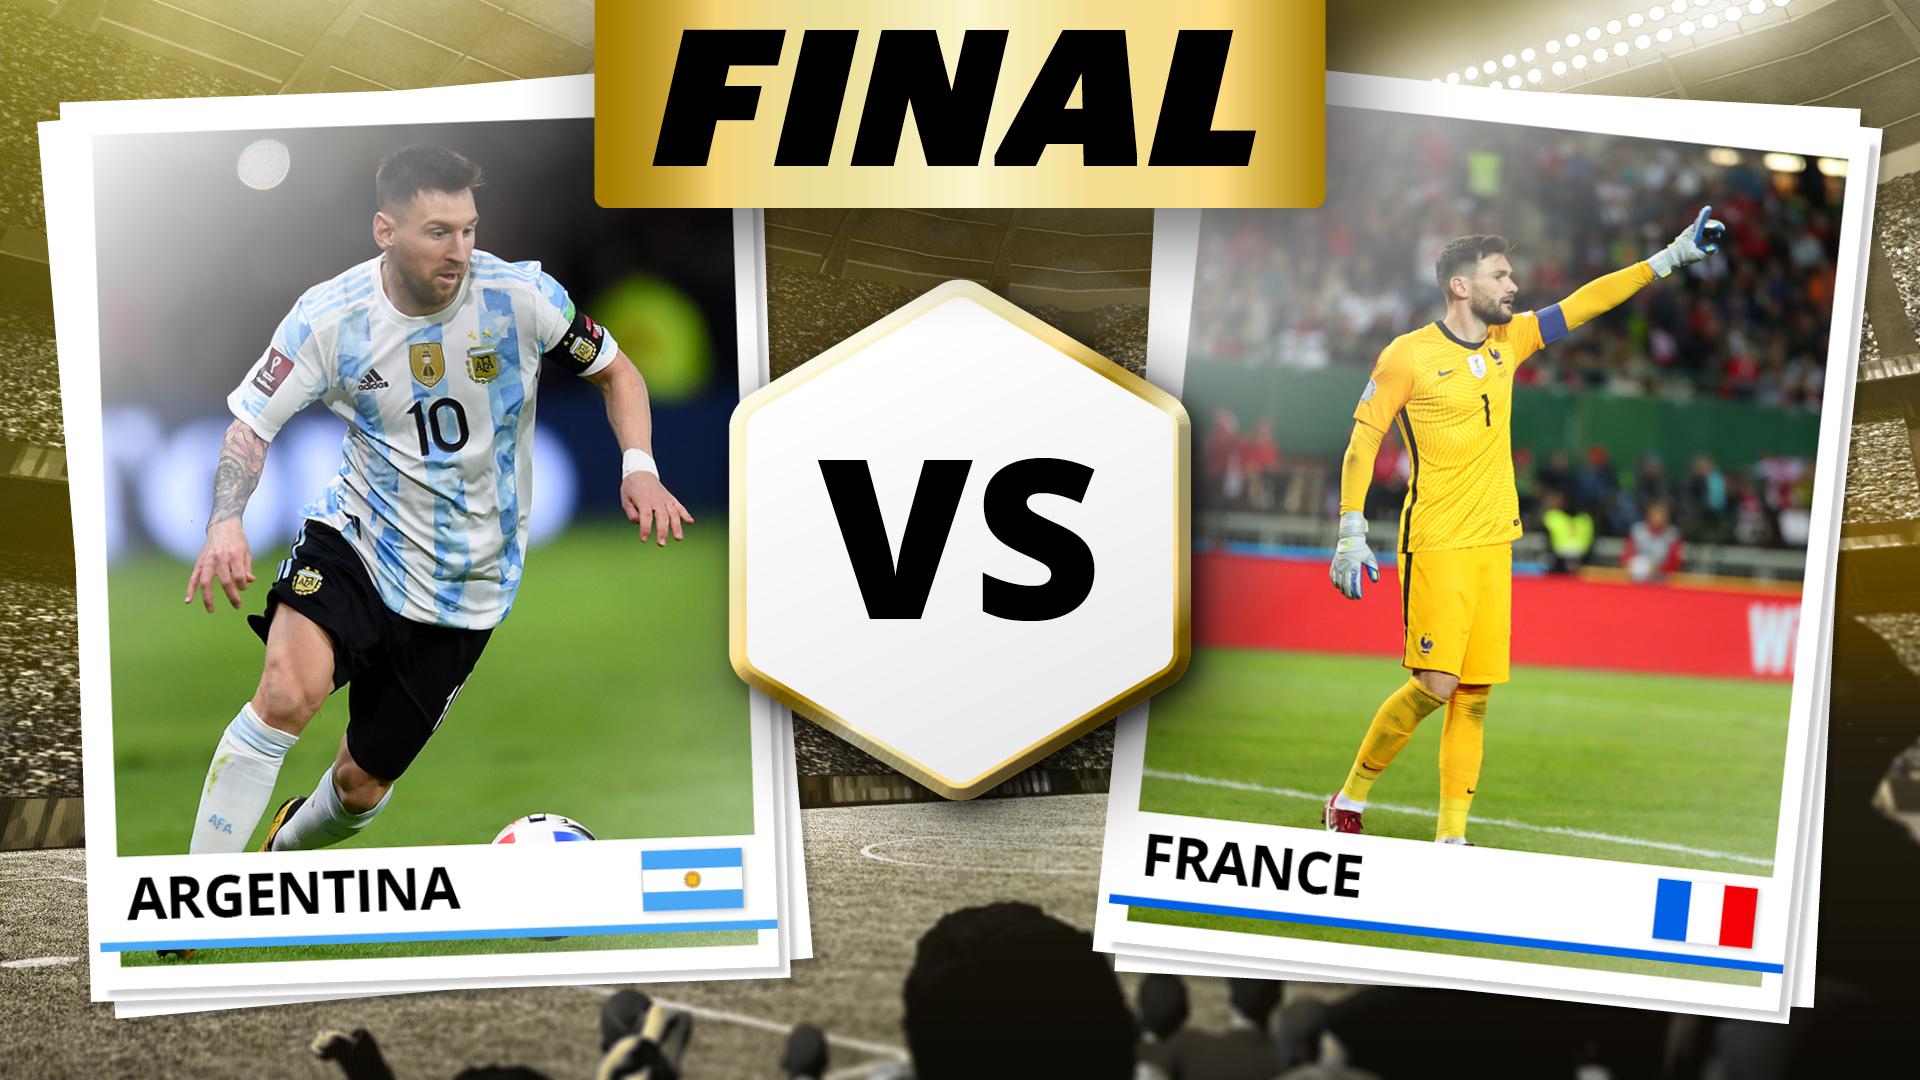 Argentina vs France live stream how to watch the World Cup 2022 final